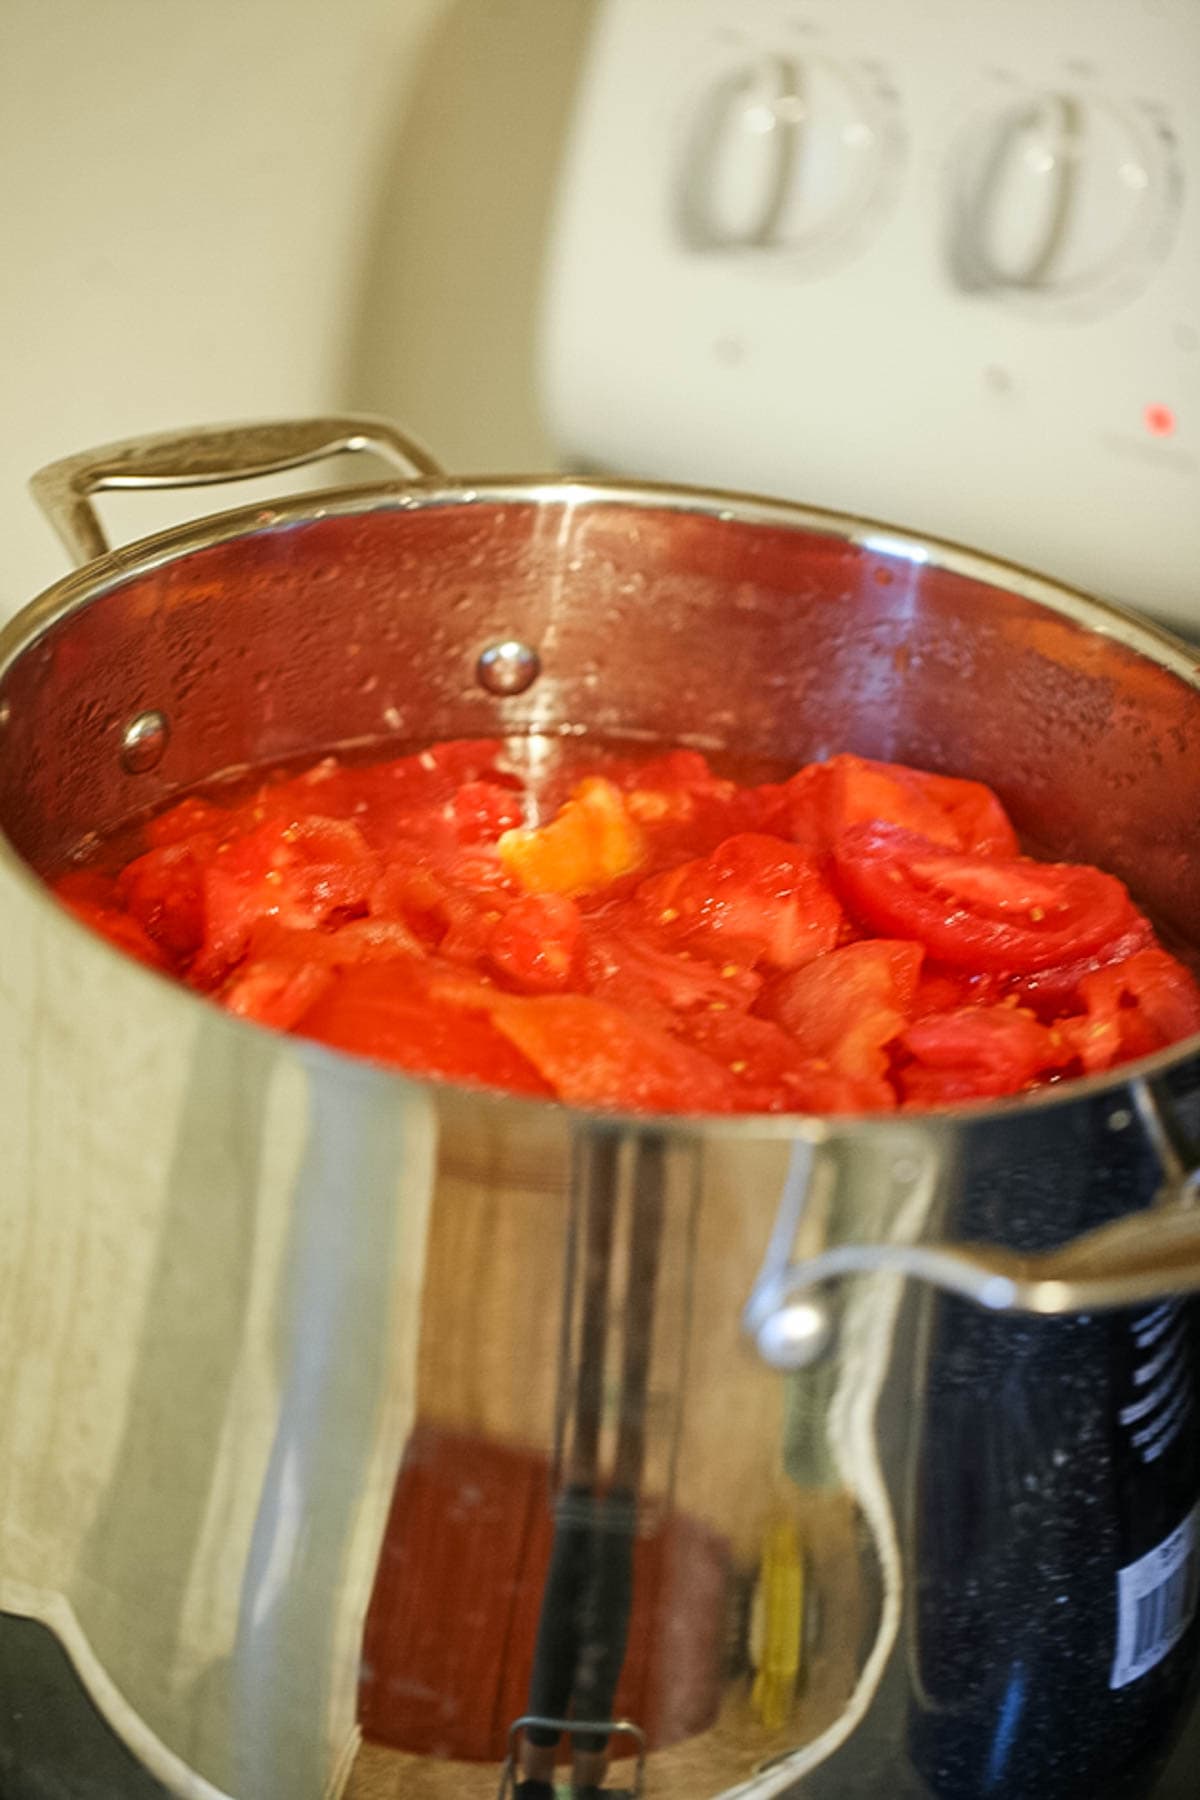 Cooking the tomatoes into sauce.